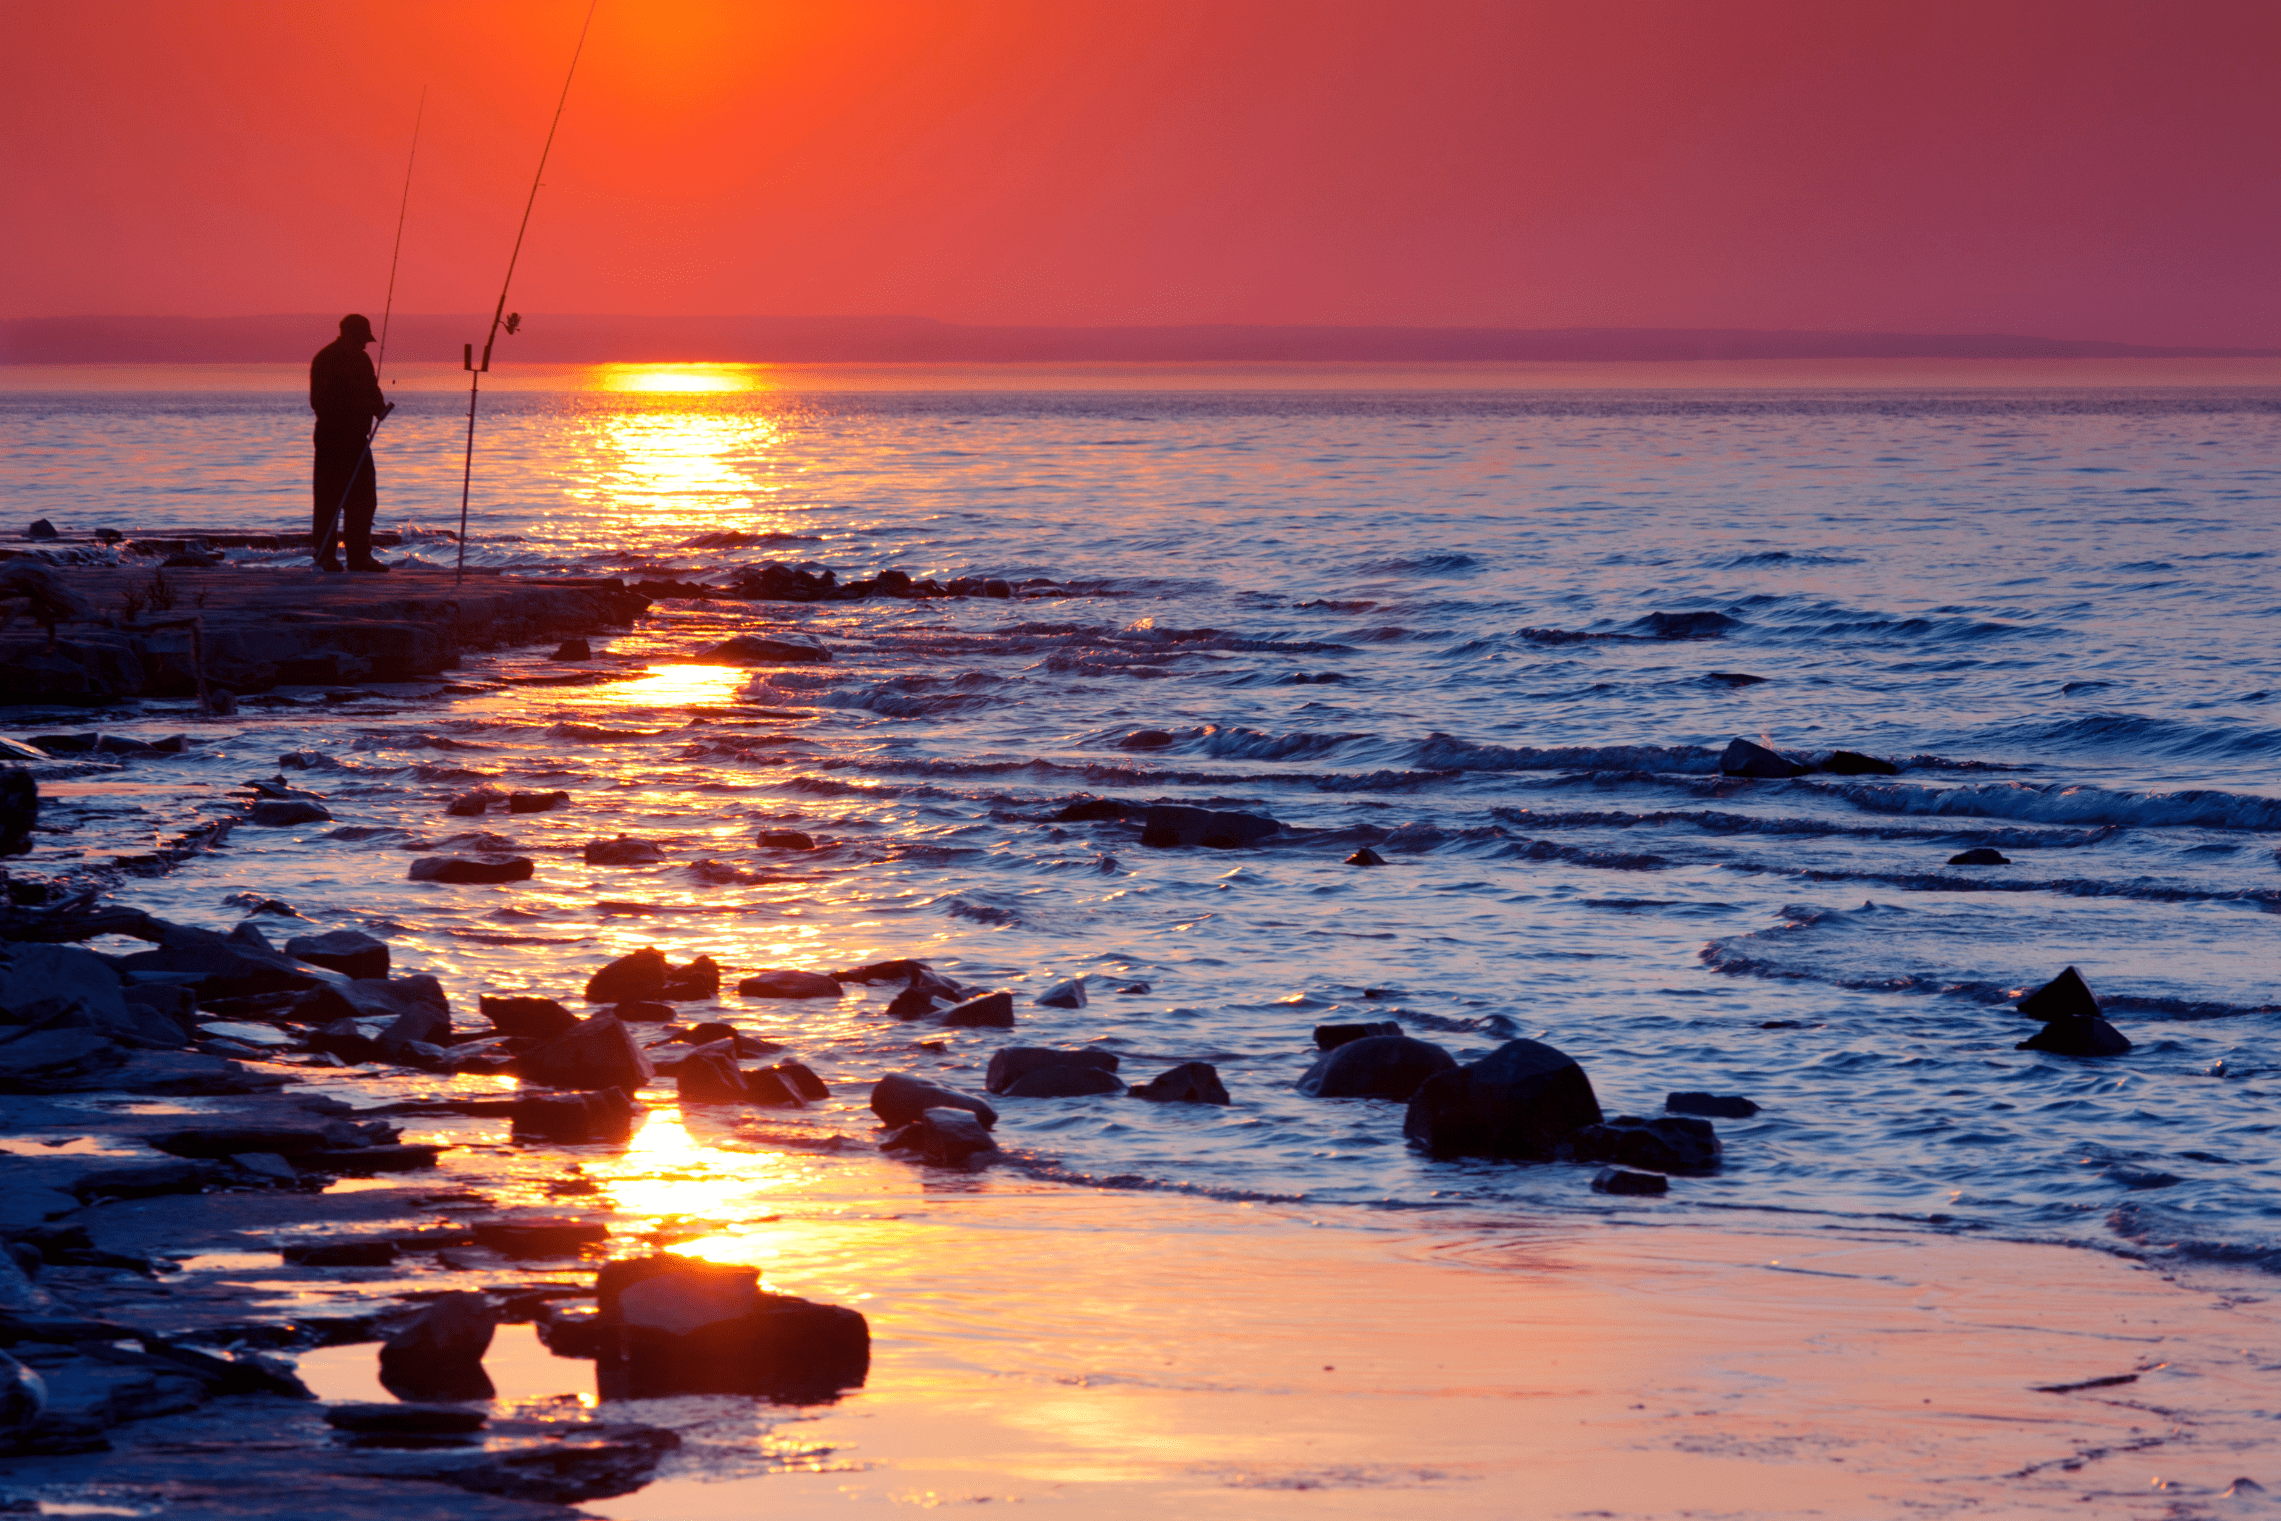 An image of a man fishing at sunset.